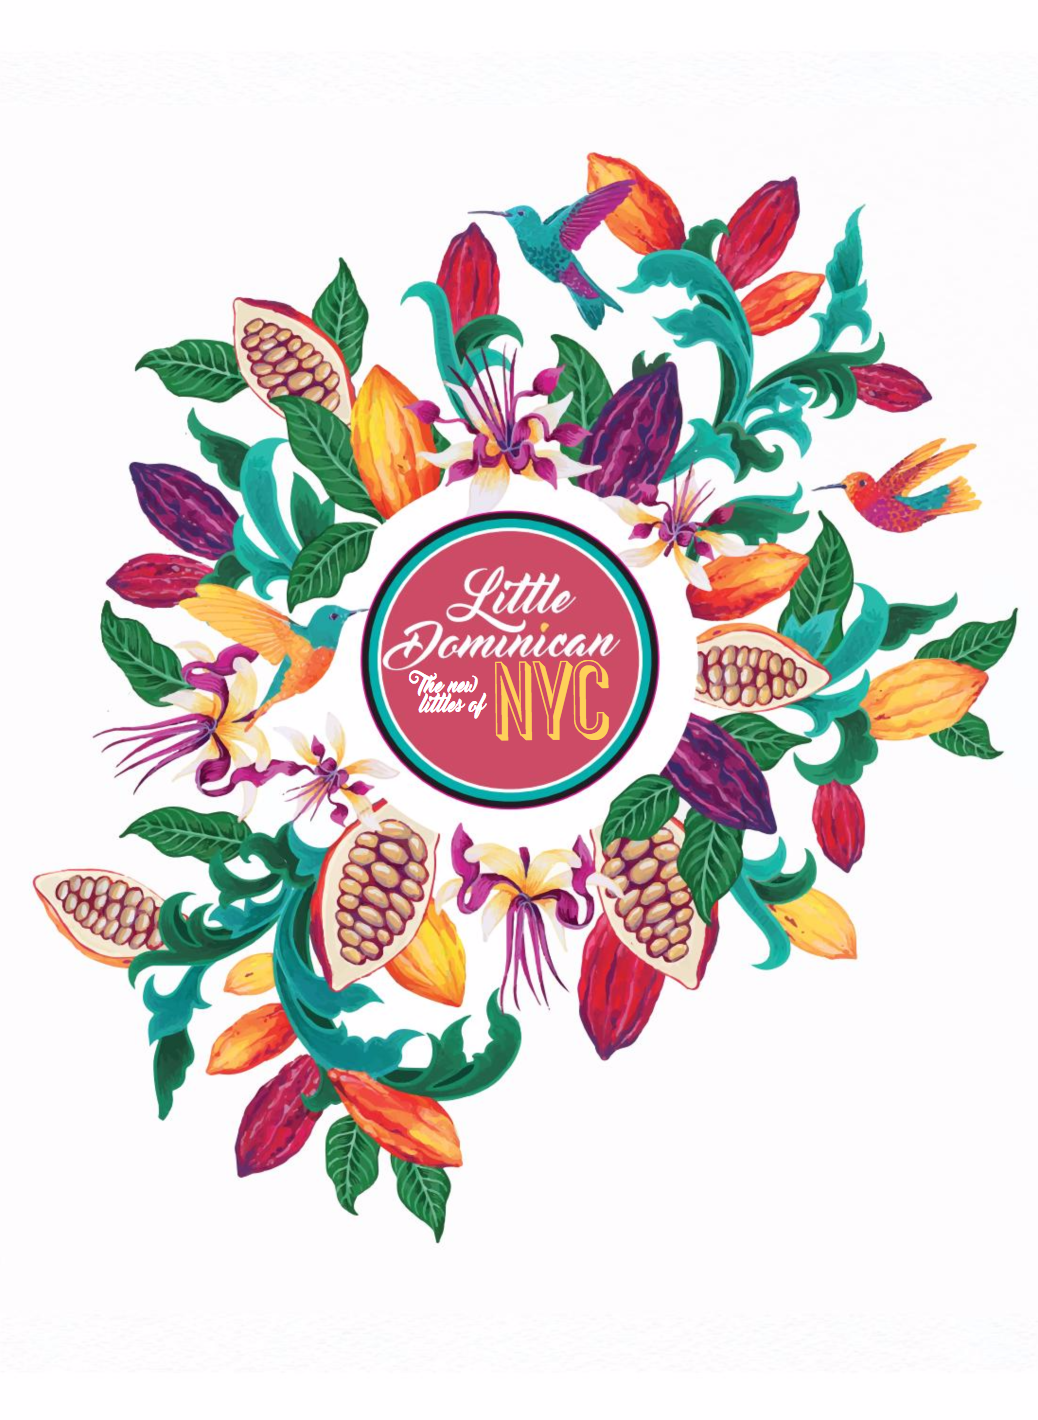 Digital Layout: The littles of NYC – A guide to Little Dominican (Washington Heights)